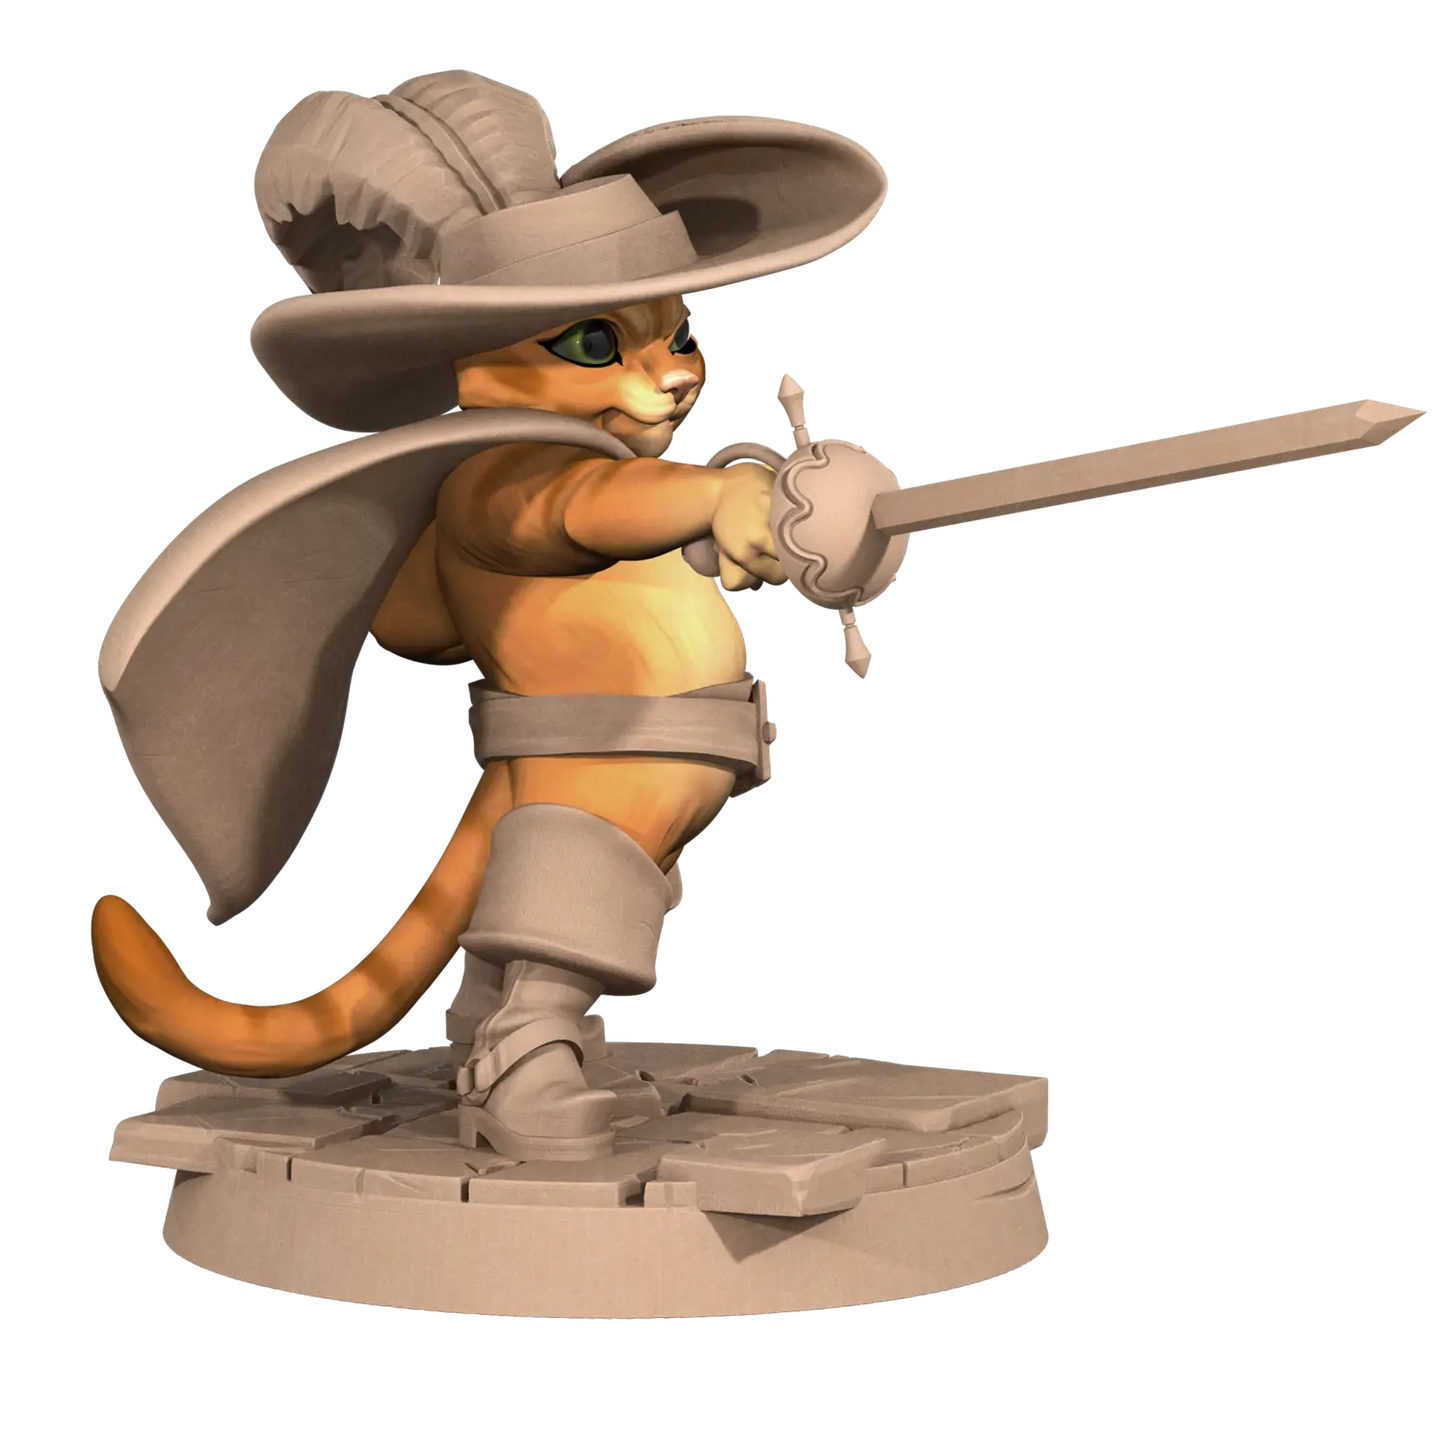 DnD Fighter - Miniature - Ranger - Rogue - Tabaxi Zentaris  Fighter - Miniature - Ranger - Rogue - Tabaxi sold by DoubleHitShop